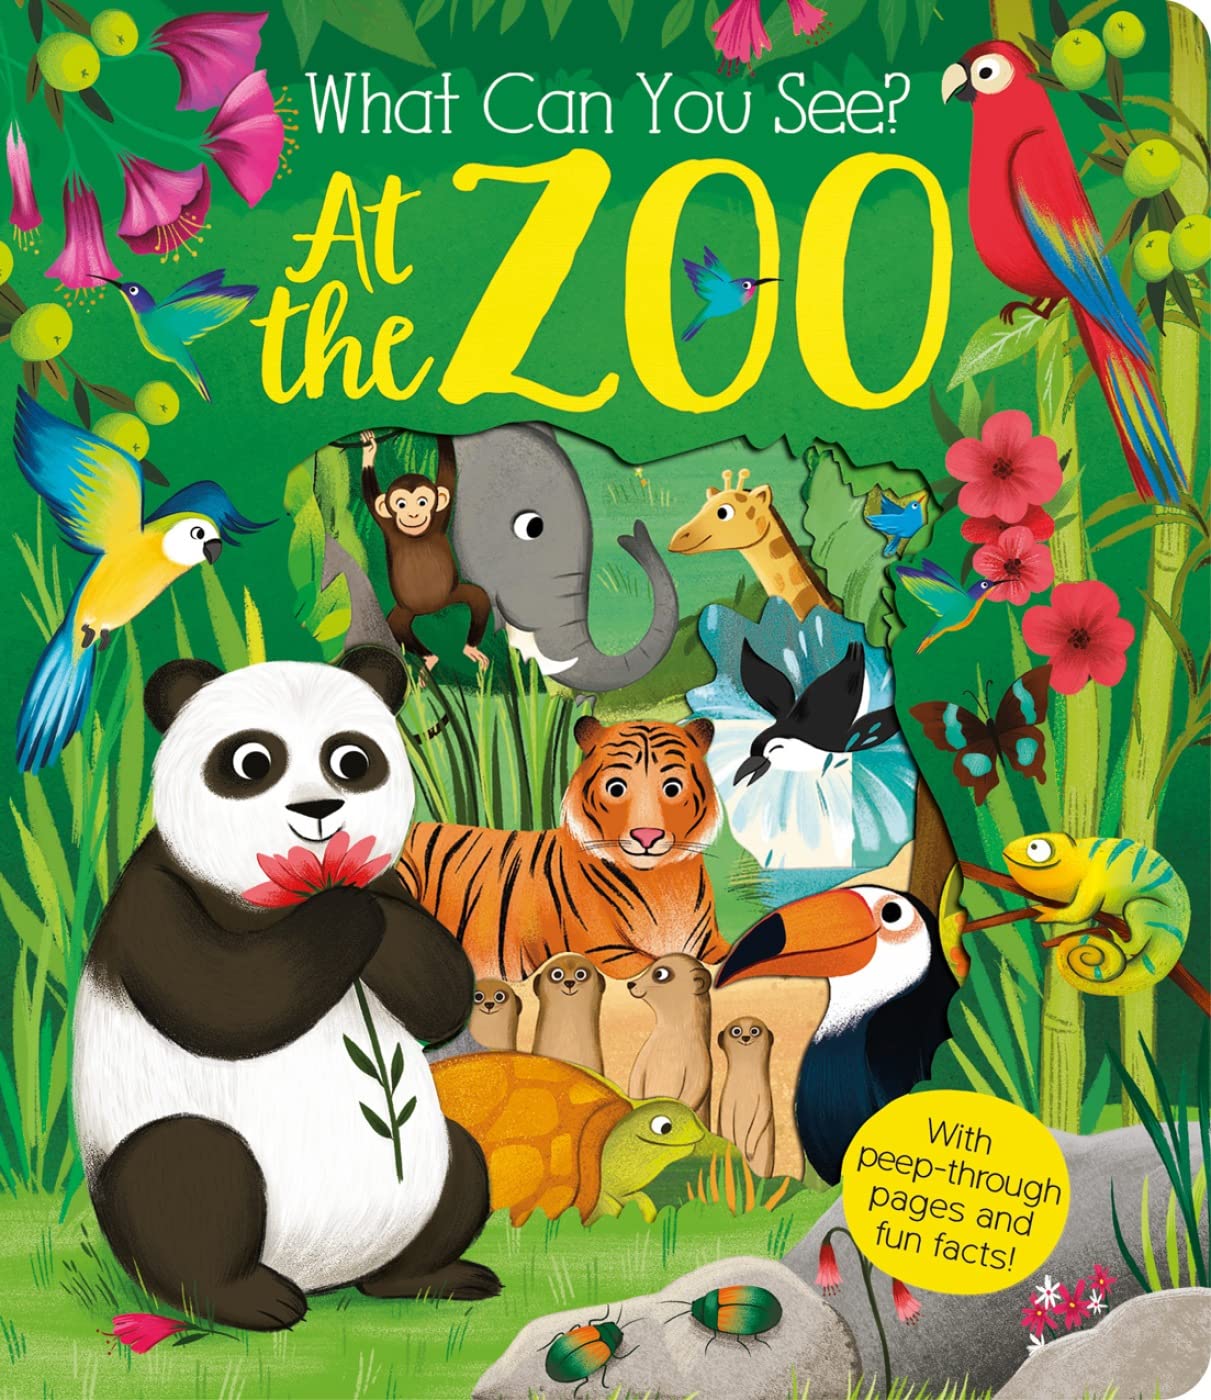 What Can You See at the Zoo